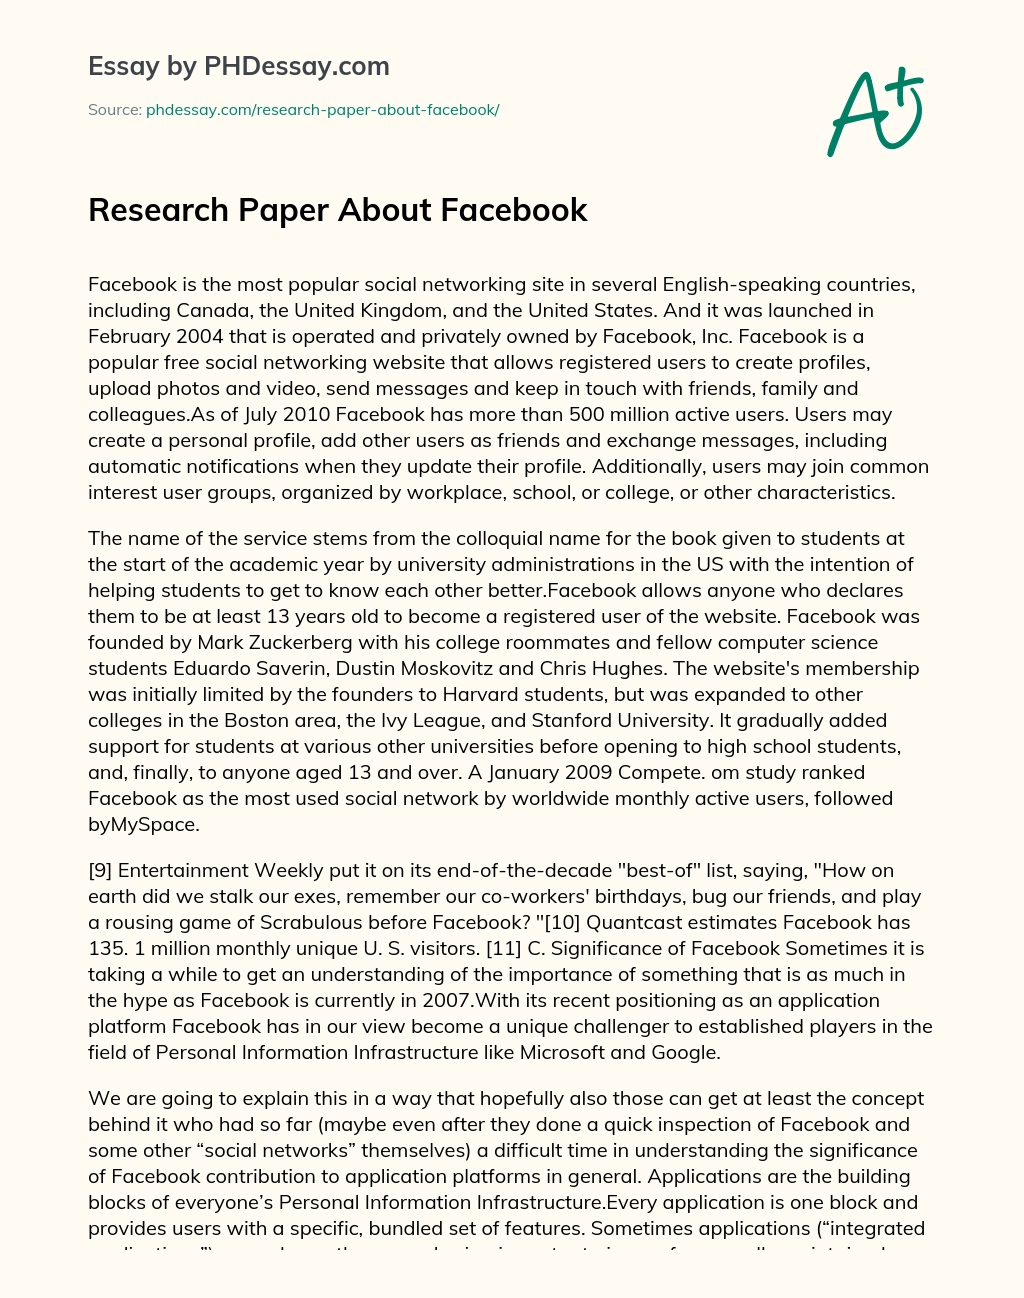 Research Paper About Facebook essay